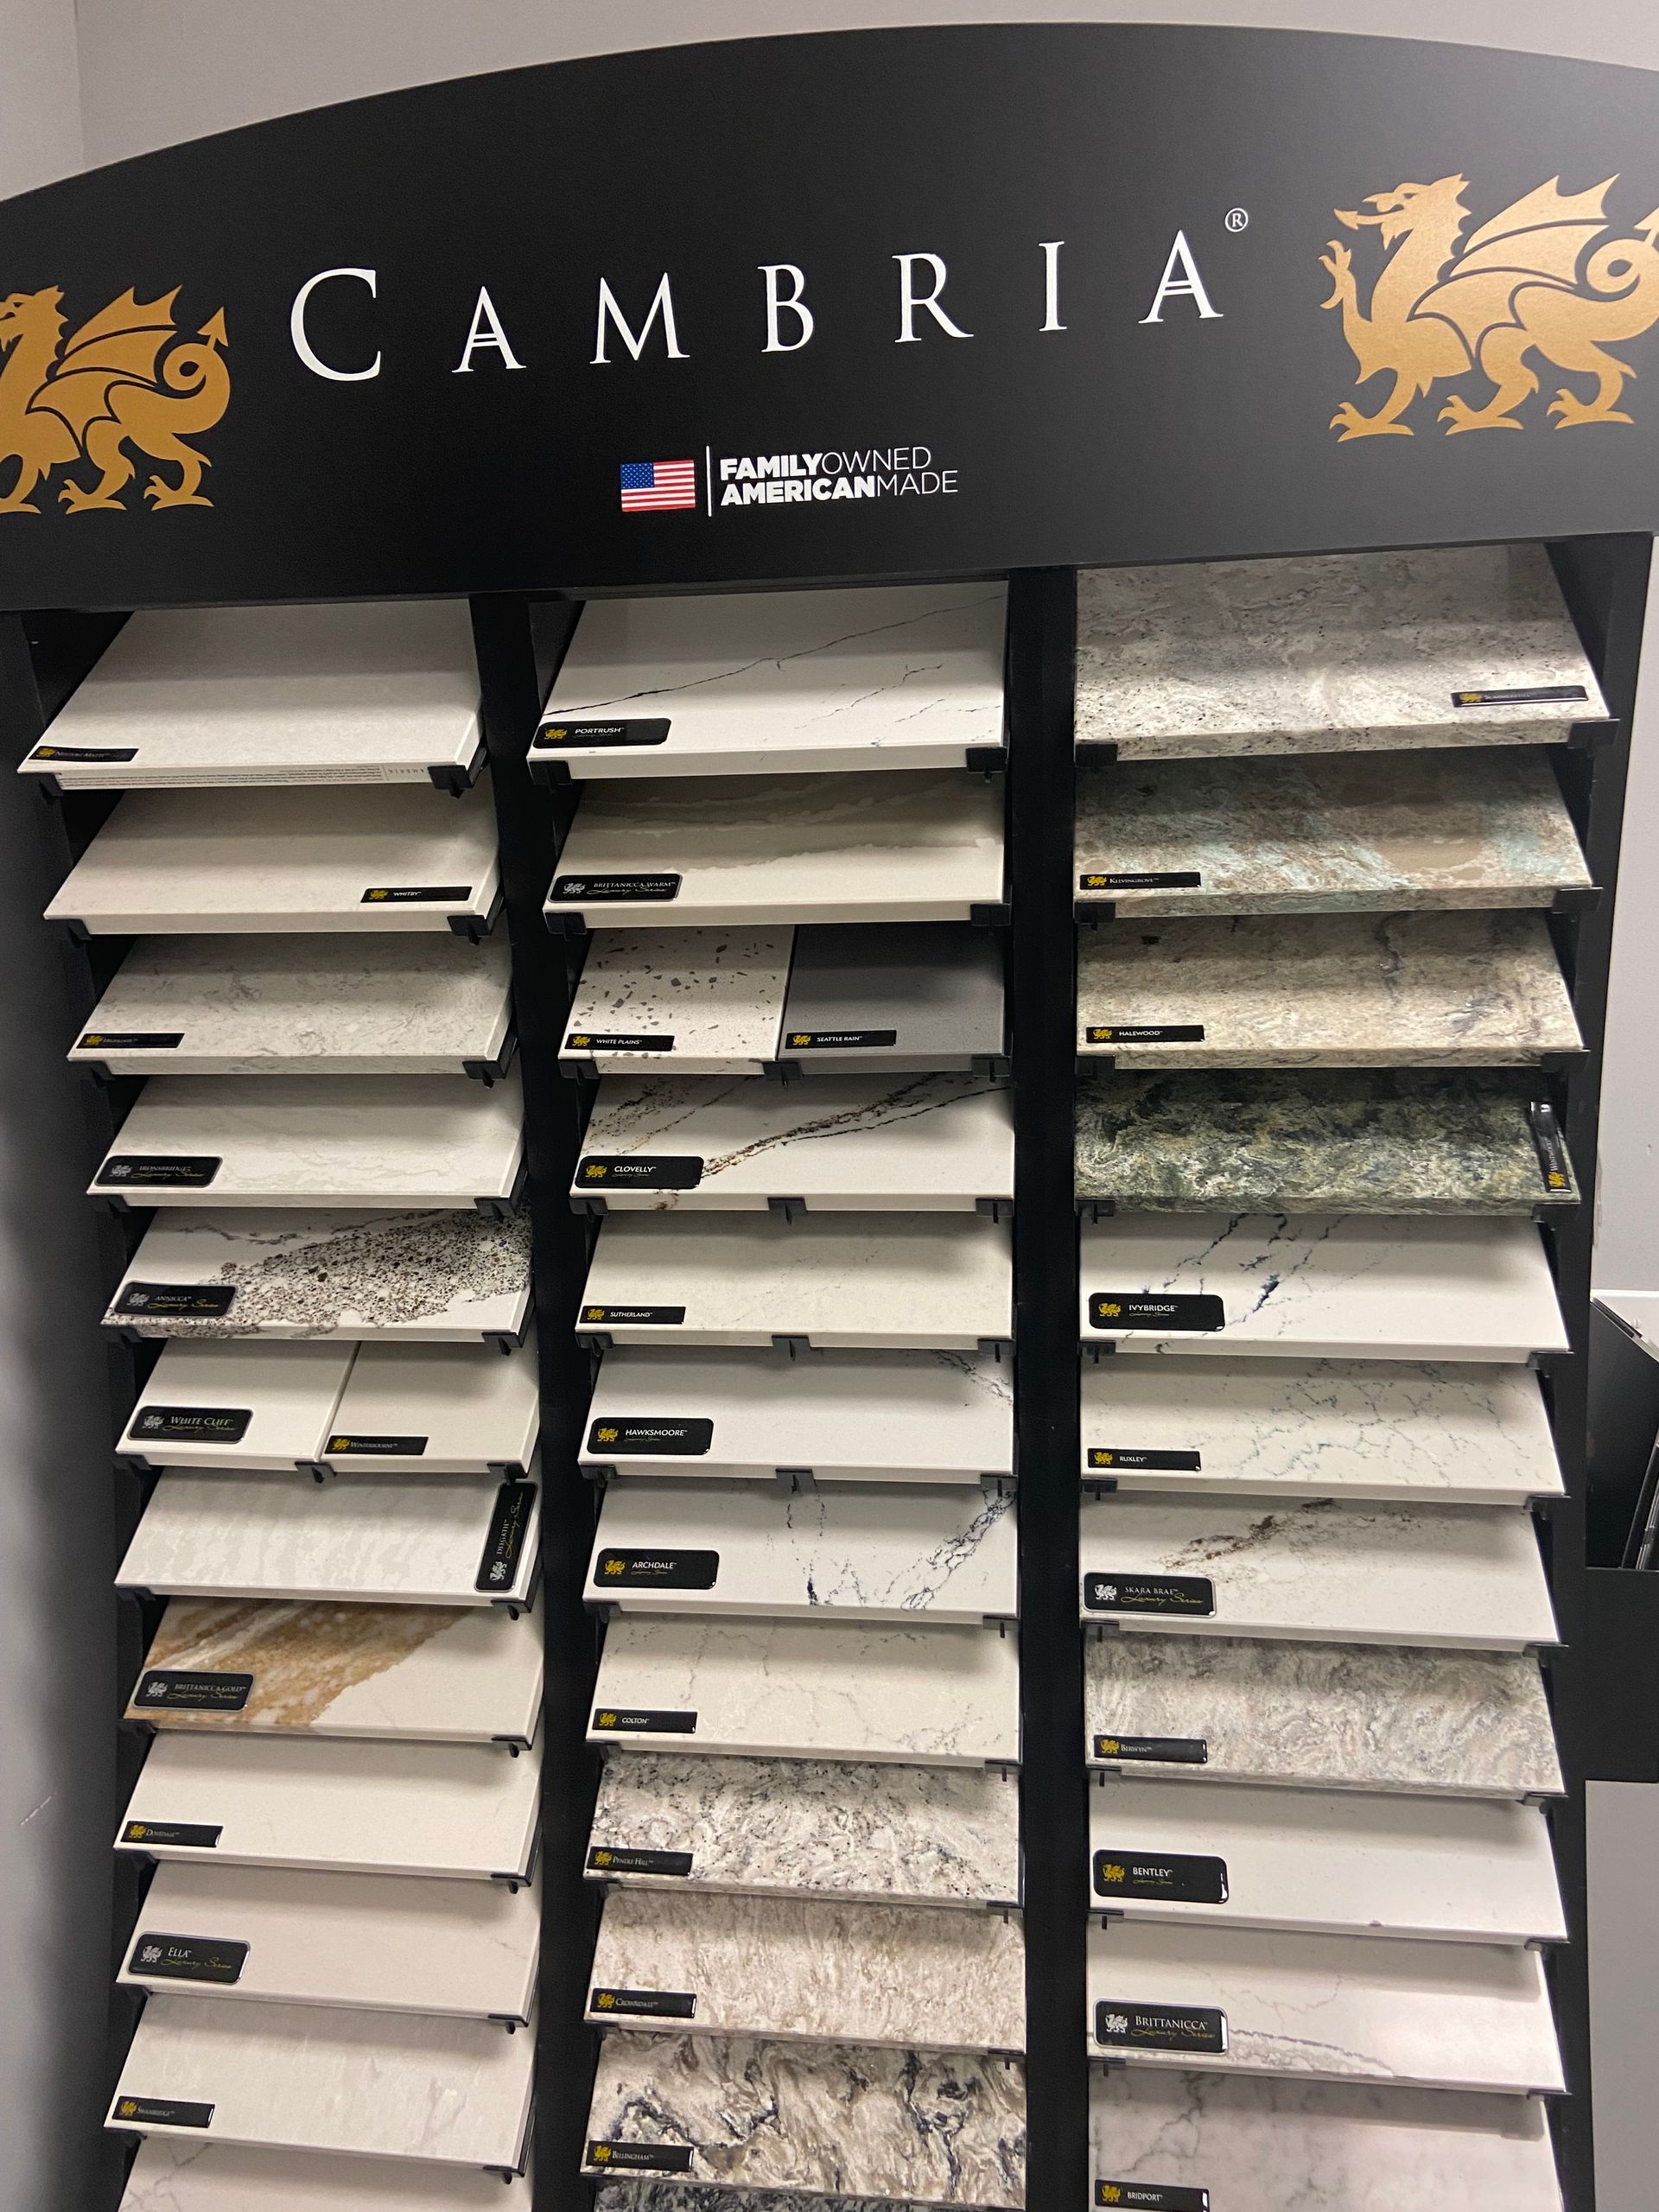 A display of cambria granite tiles in a store